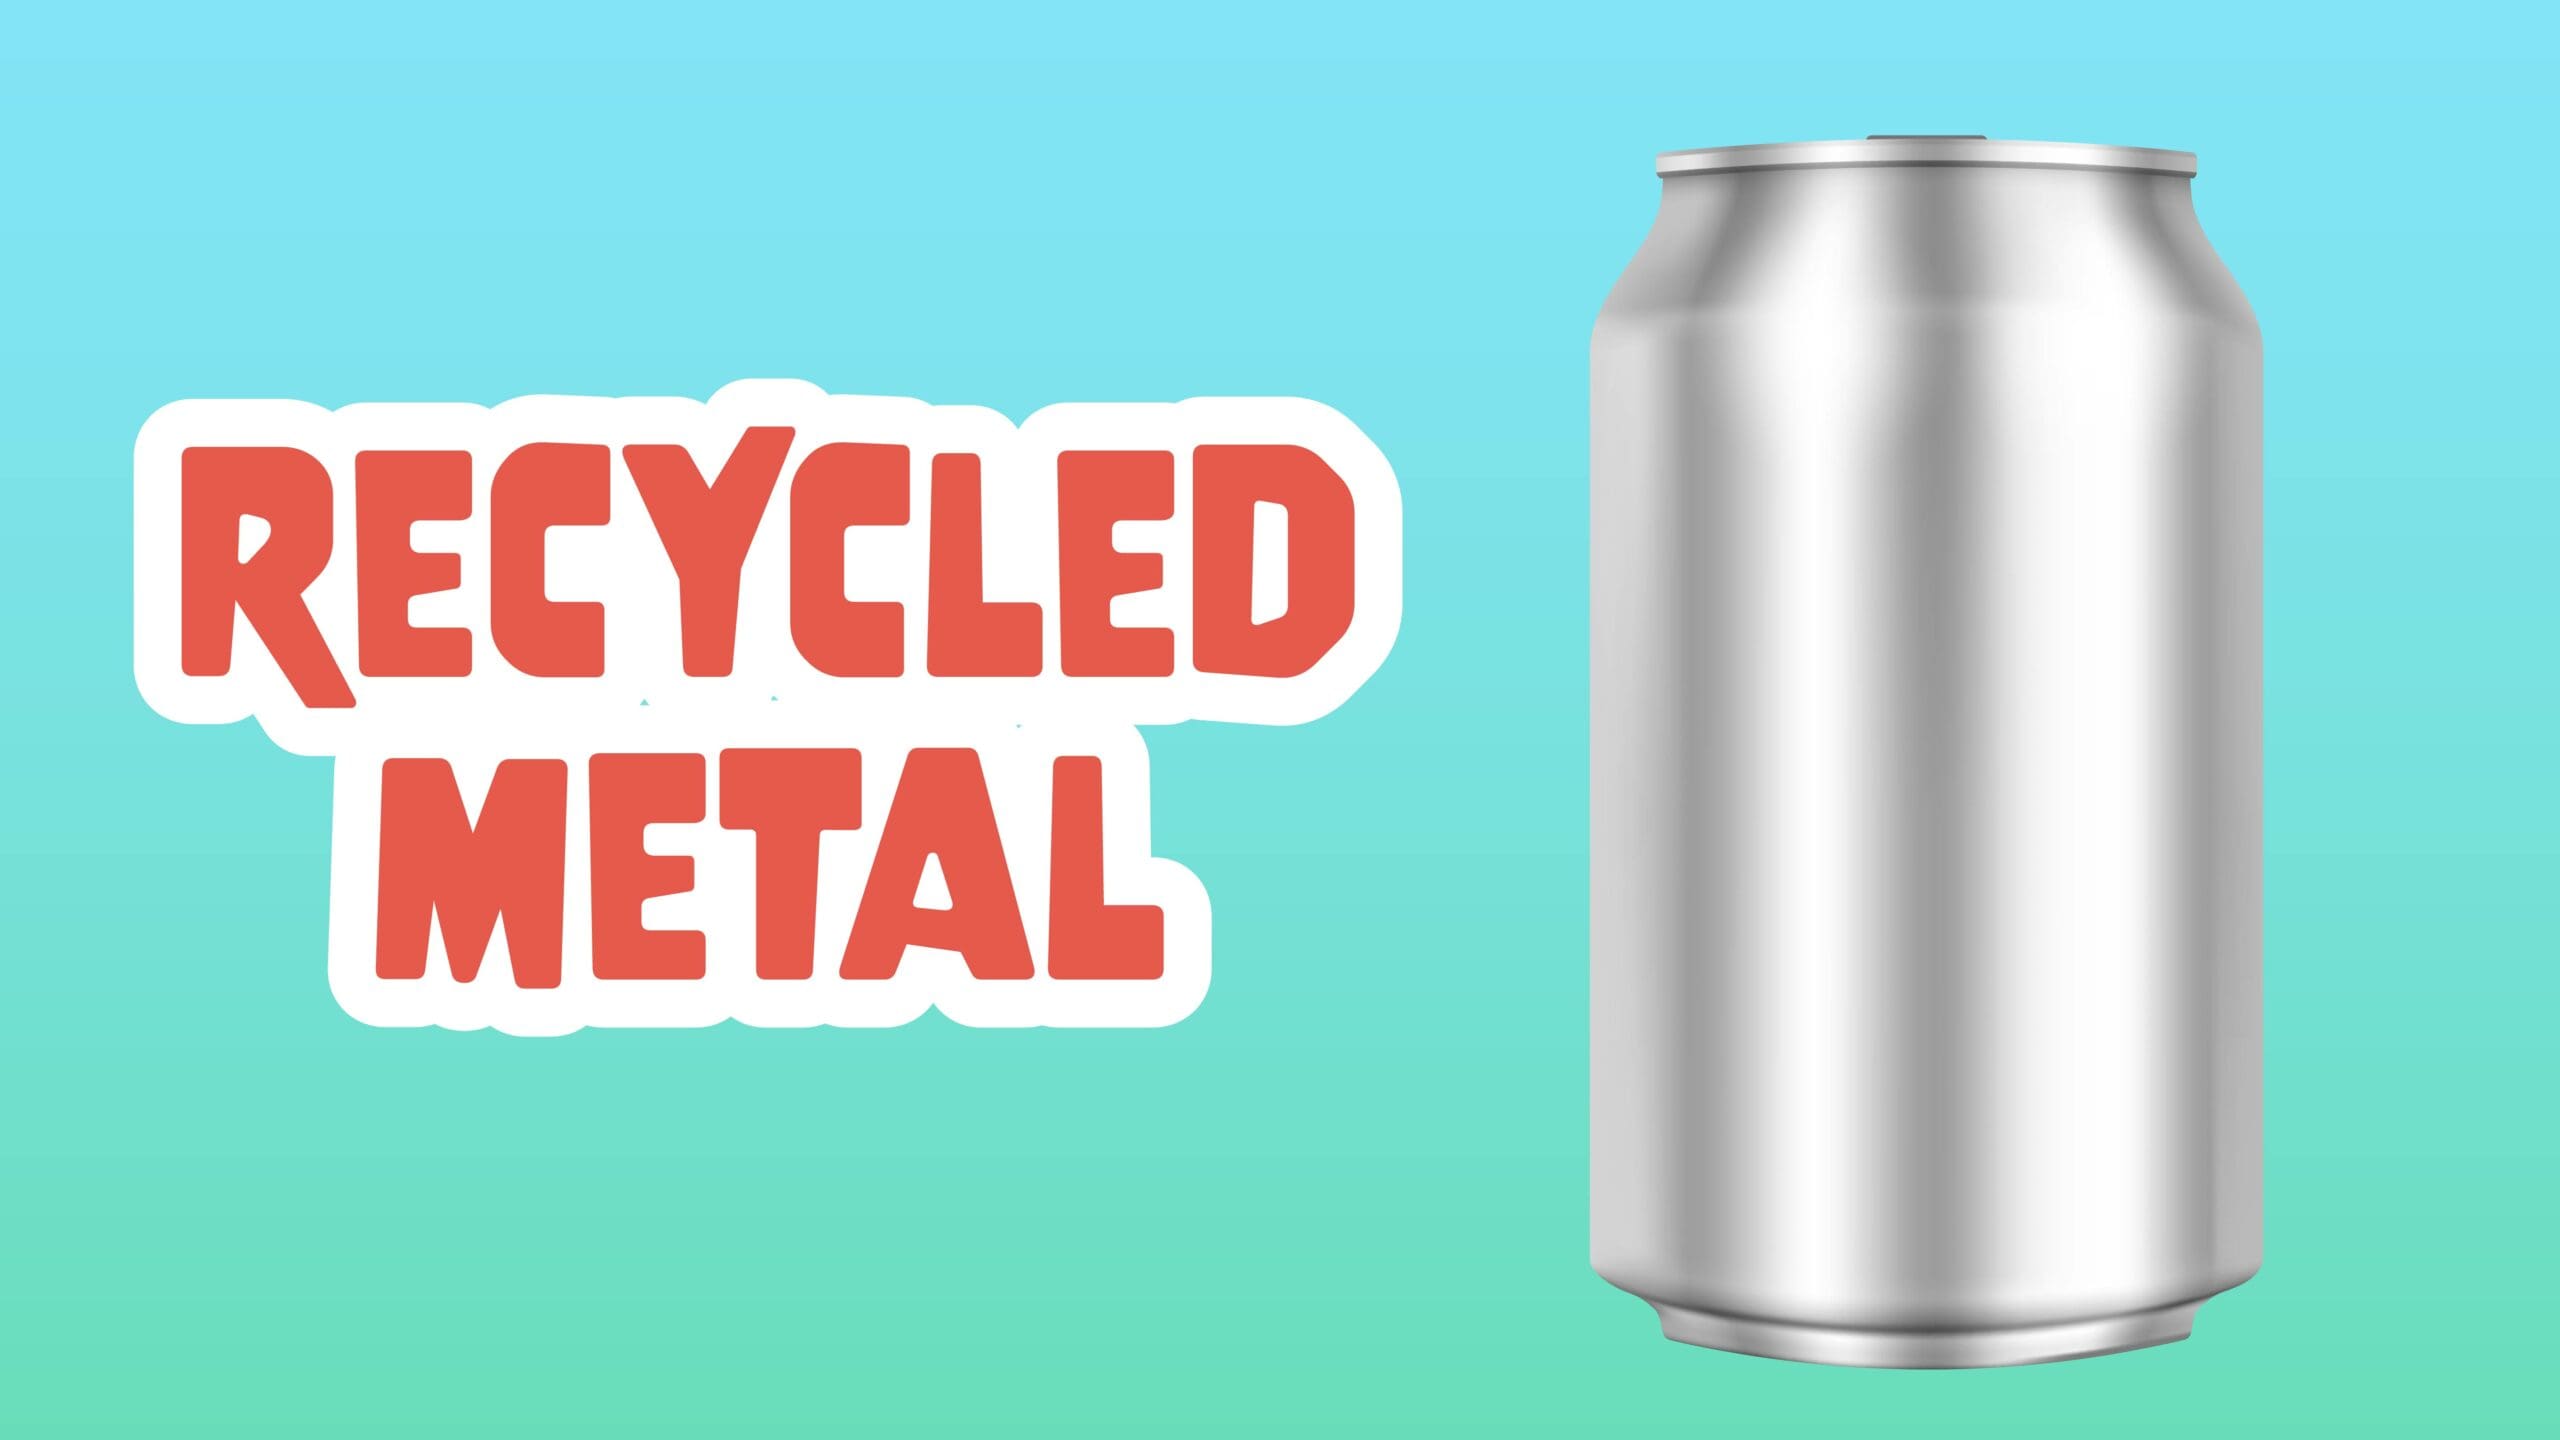 Recycling Metals Facts for Kids – 5 Rich Facts about Recycling Metals